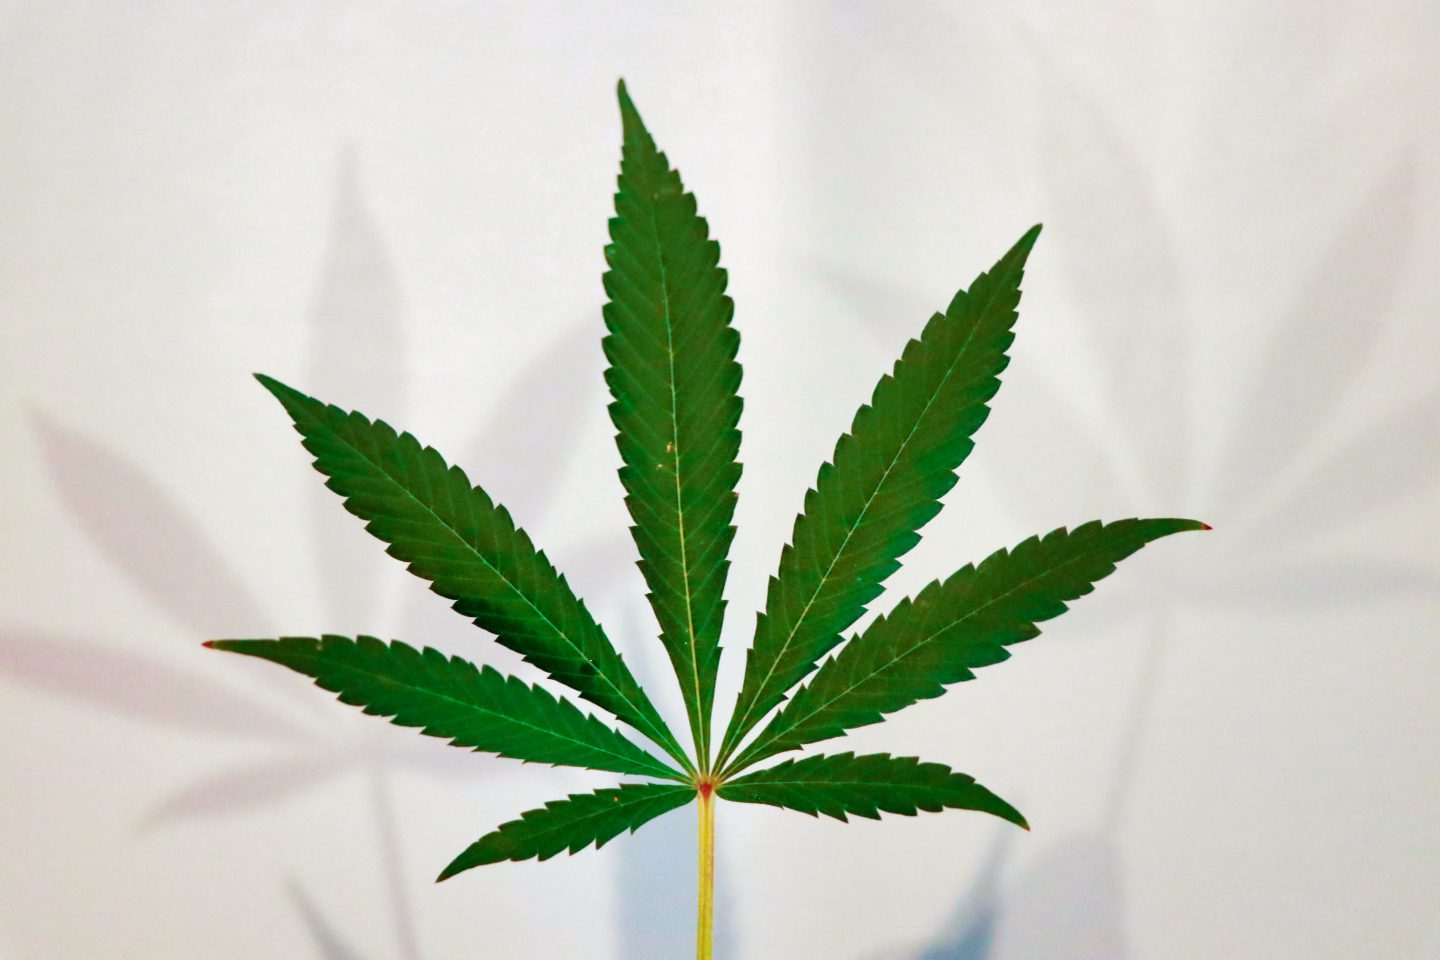 A photo of a green cannabis leaf held up against a white background.